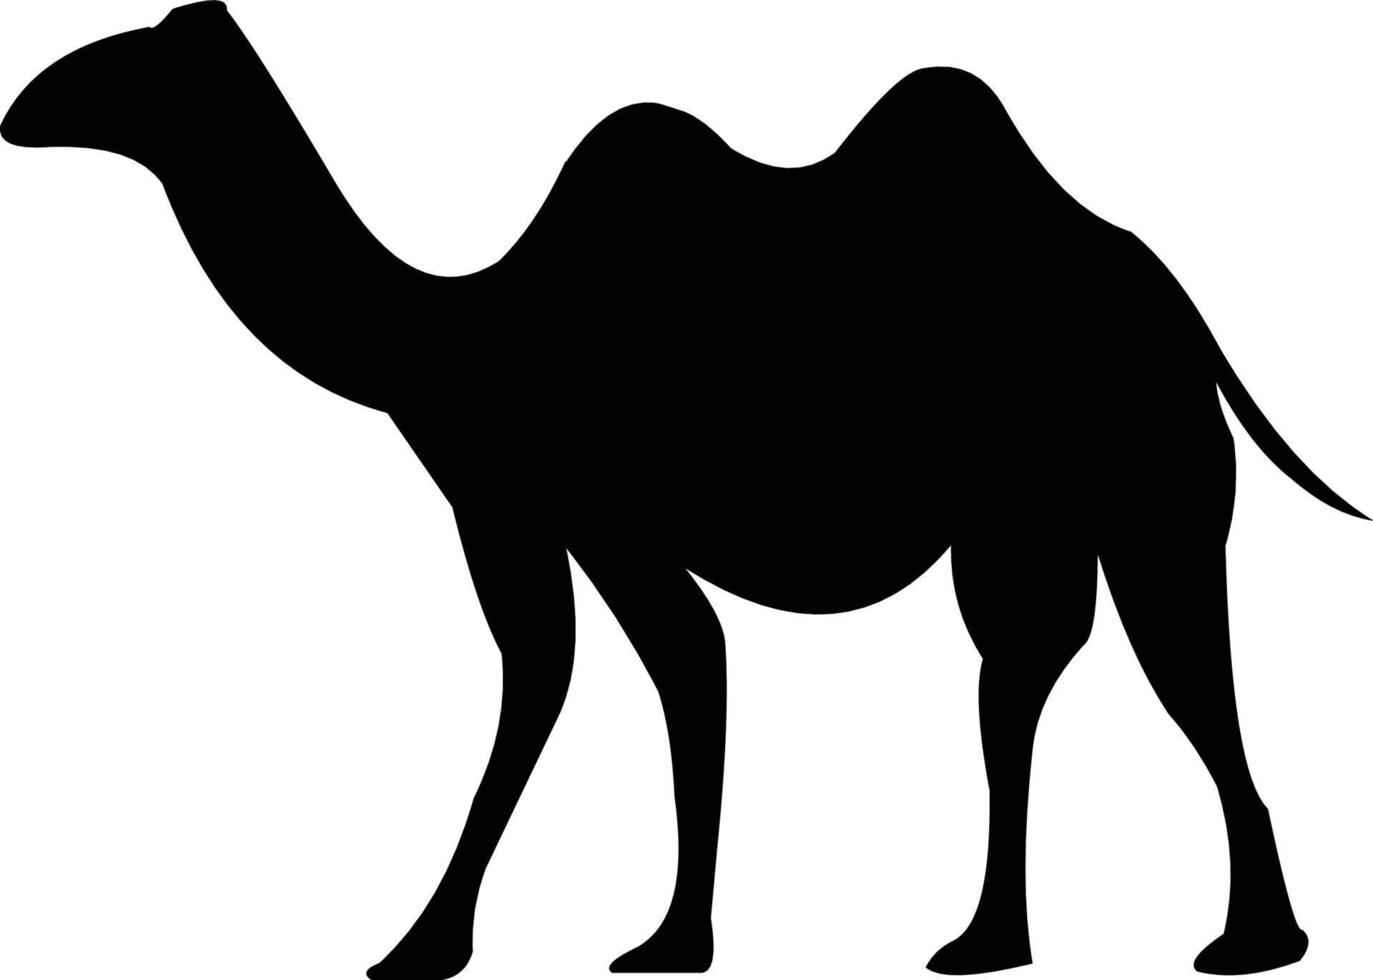 black and white camel vector images that you can use as needed